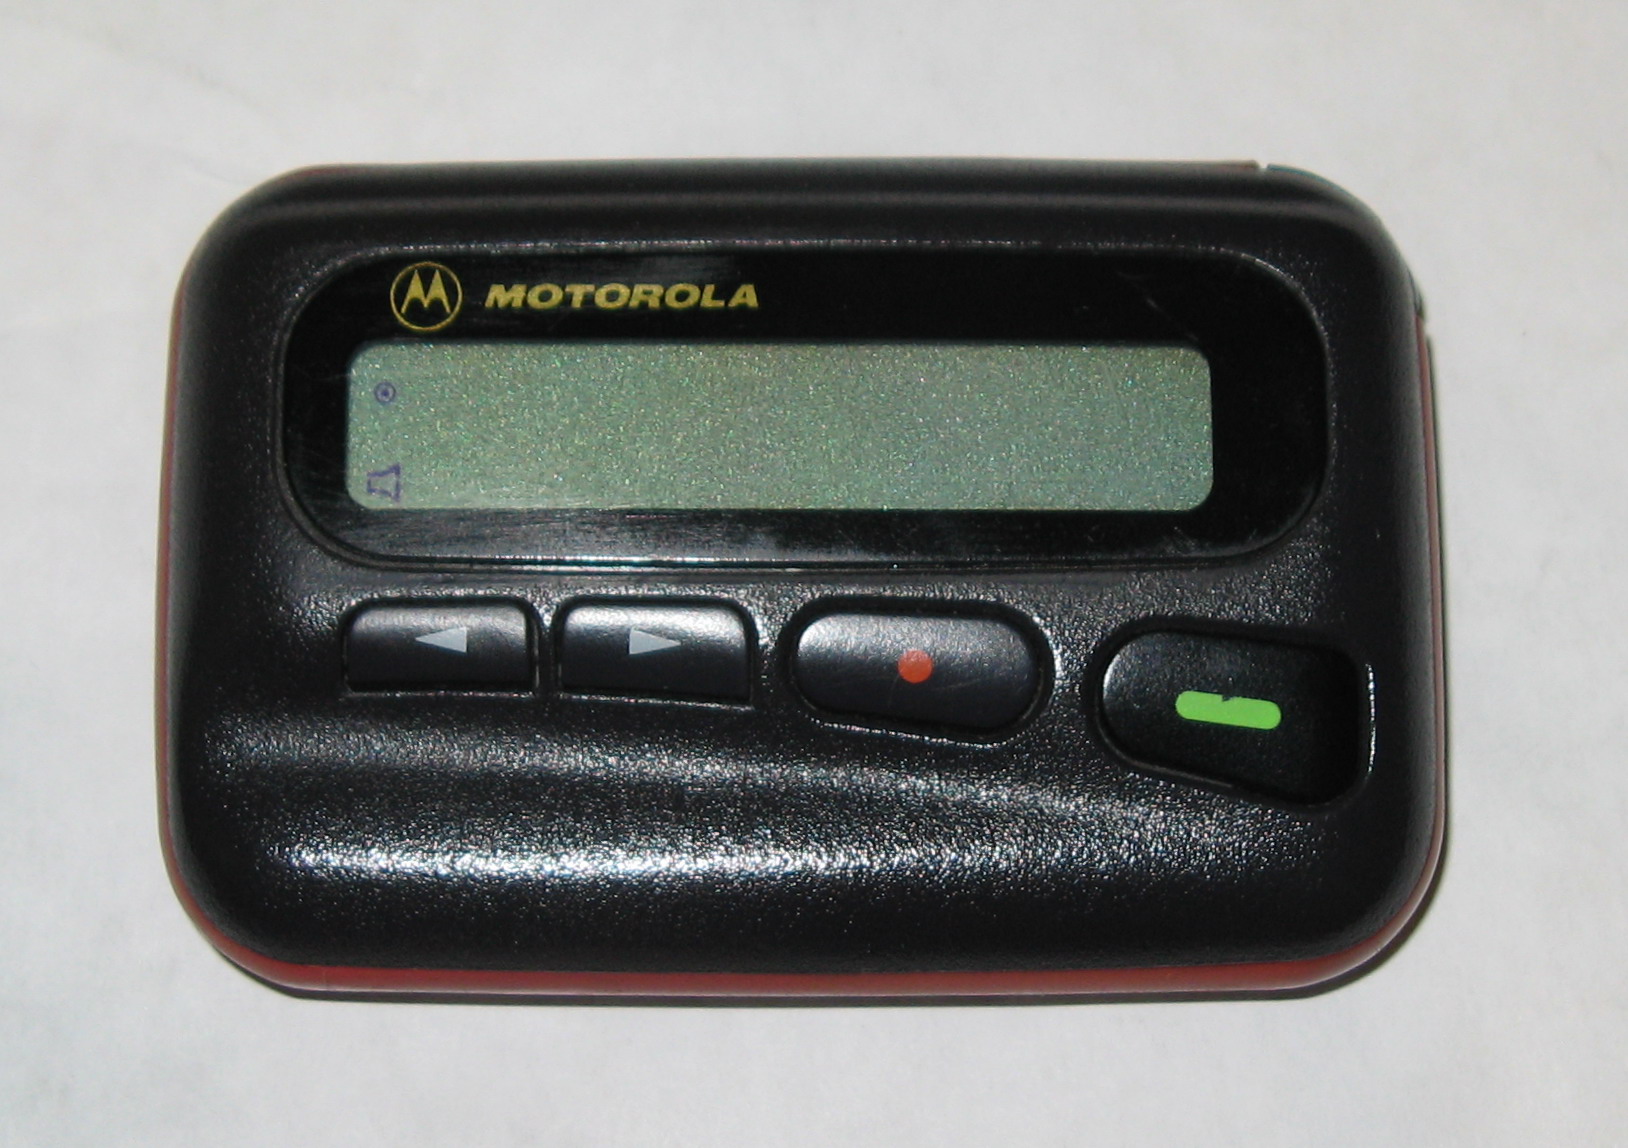 Motorola Pagers